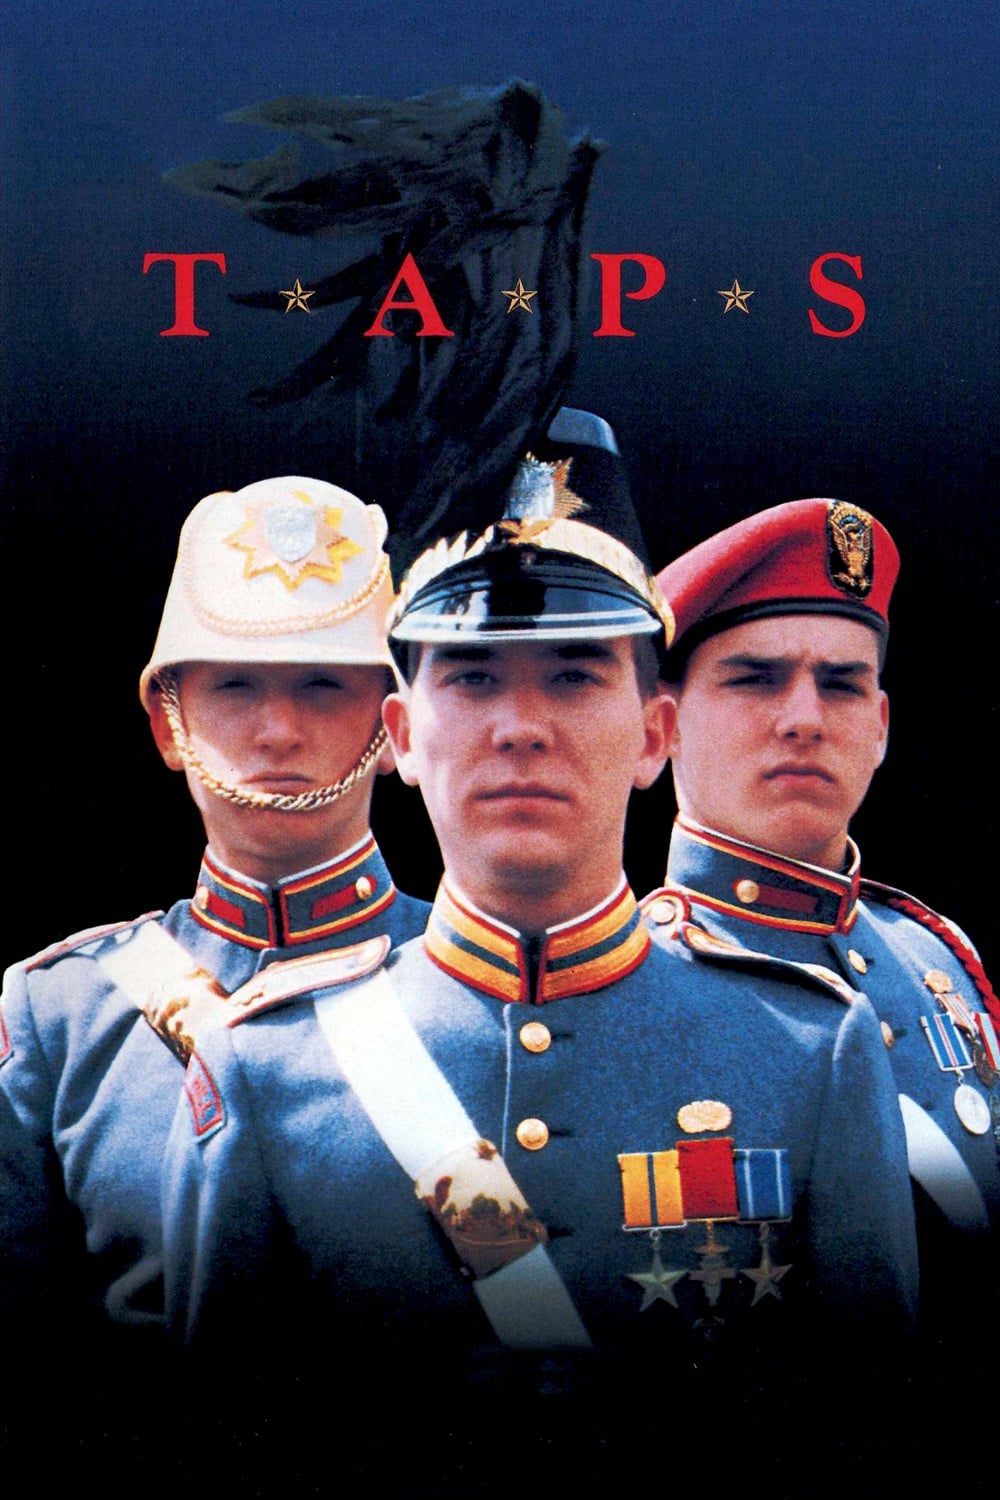 Poster for the movie "Taps"